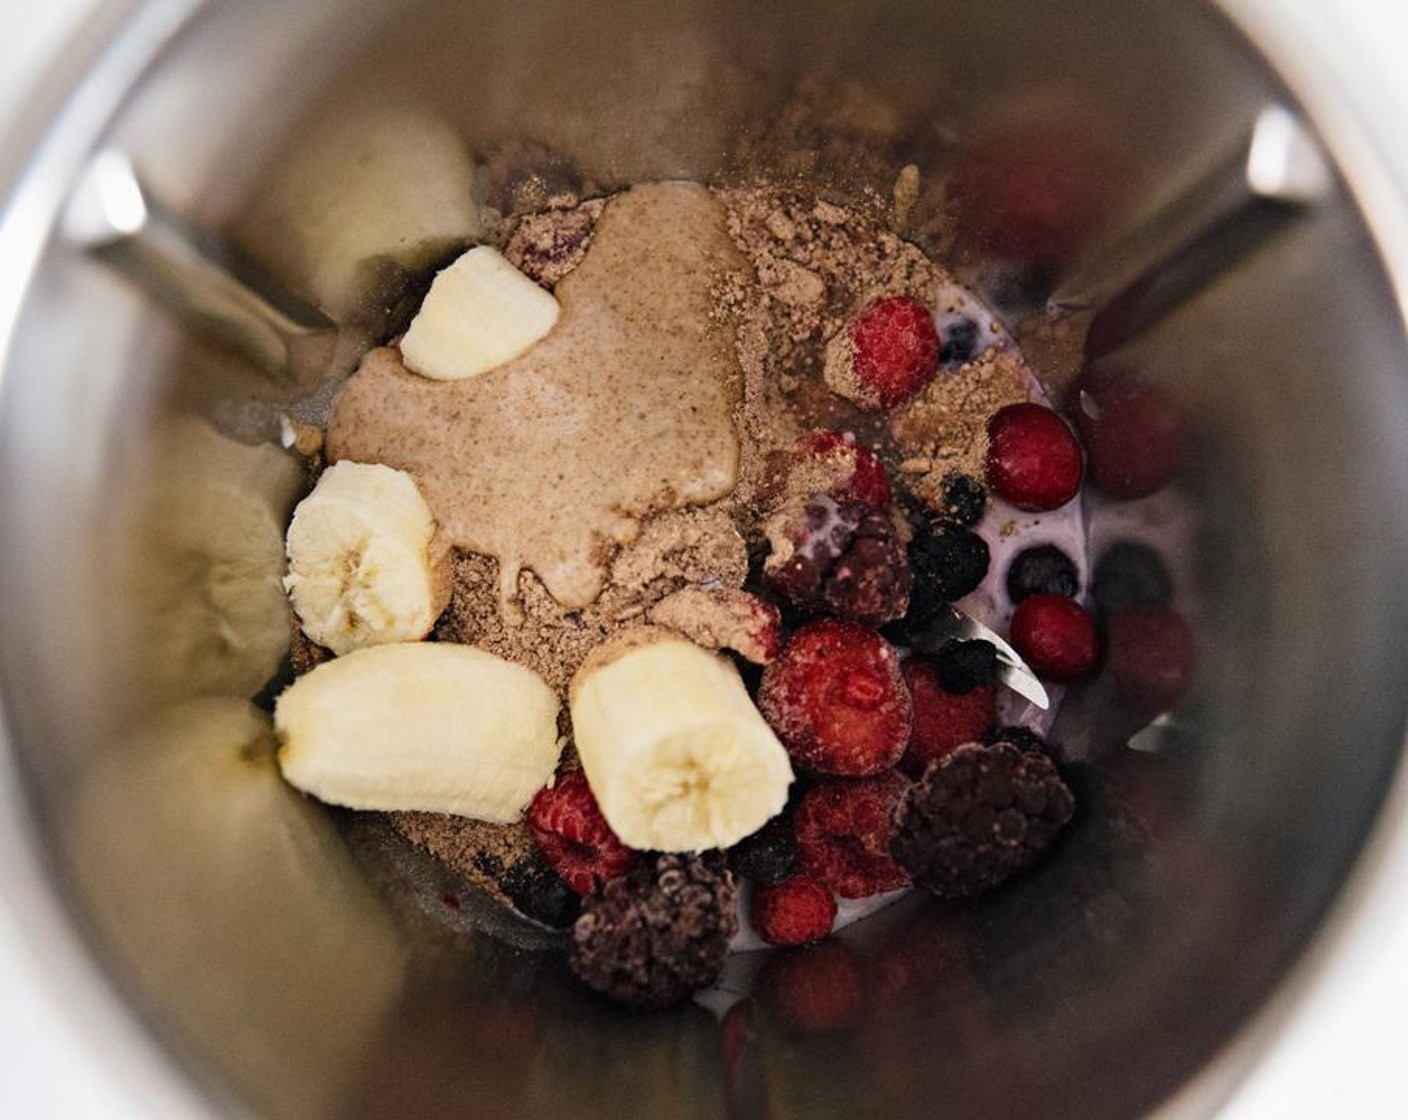 step 2 Peel and roughly chop the Banana (1). Add to your blender, along with the Frozen Mixed Berries (1 cup), juice from Lemon (1), Purely Pinole® Blueberry and Banana Power Breakfast (1/4 cup), Almond Butter (1 Tbsp), and Almond Milk (1/2 cup).